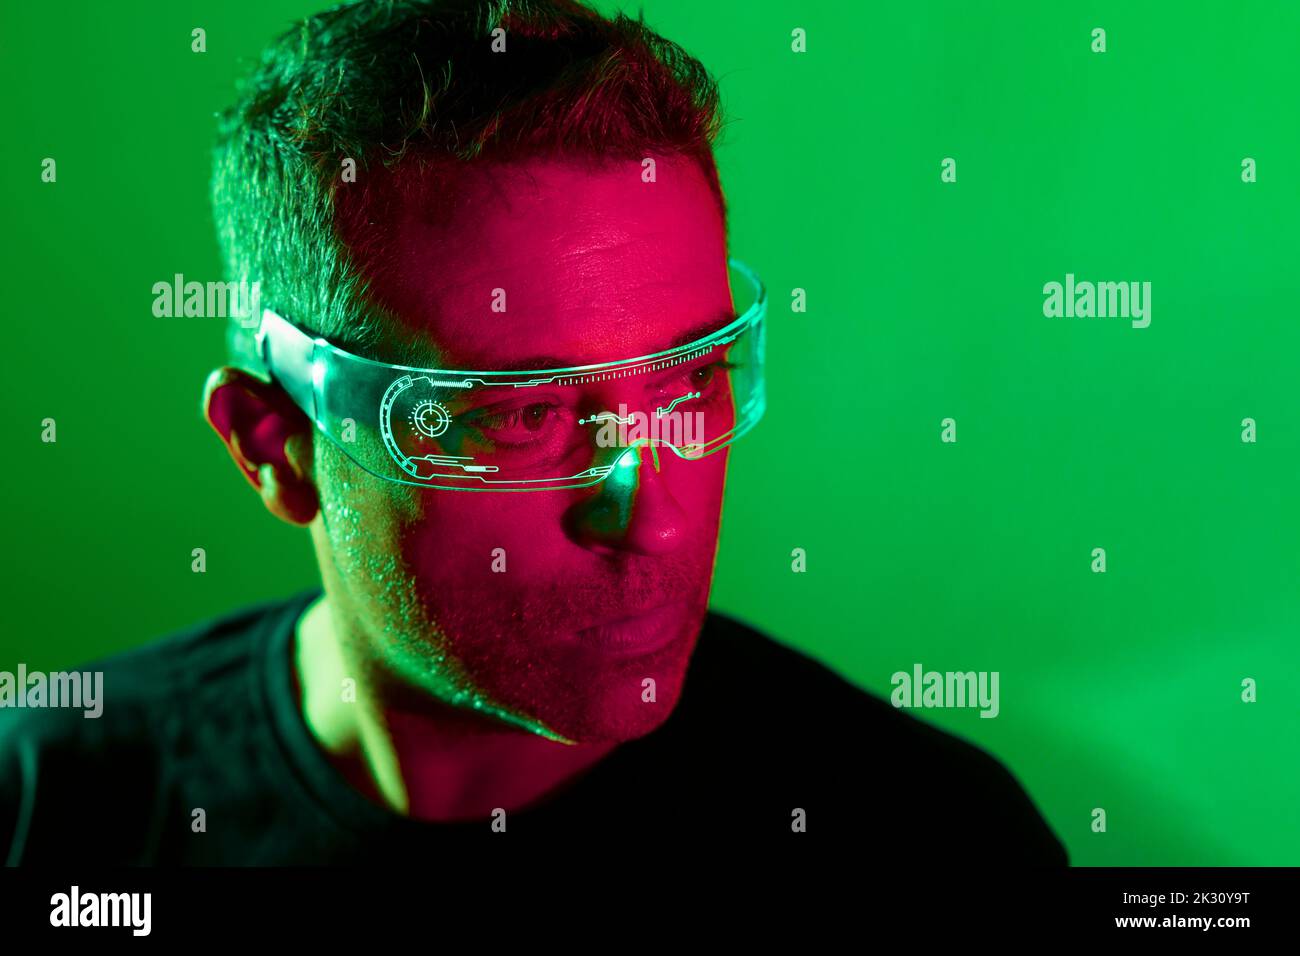 Contemplative man wearing smart glasses against green background Stock Photo